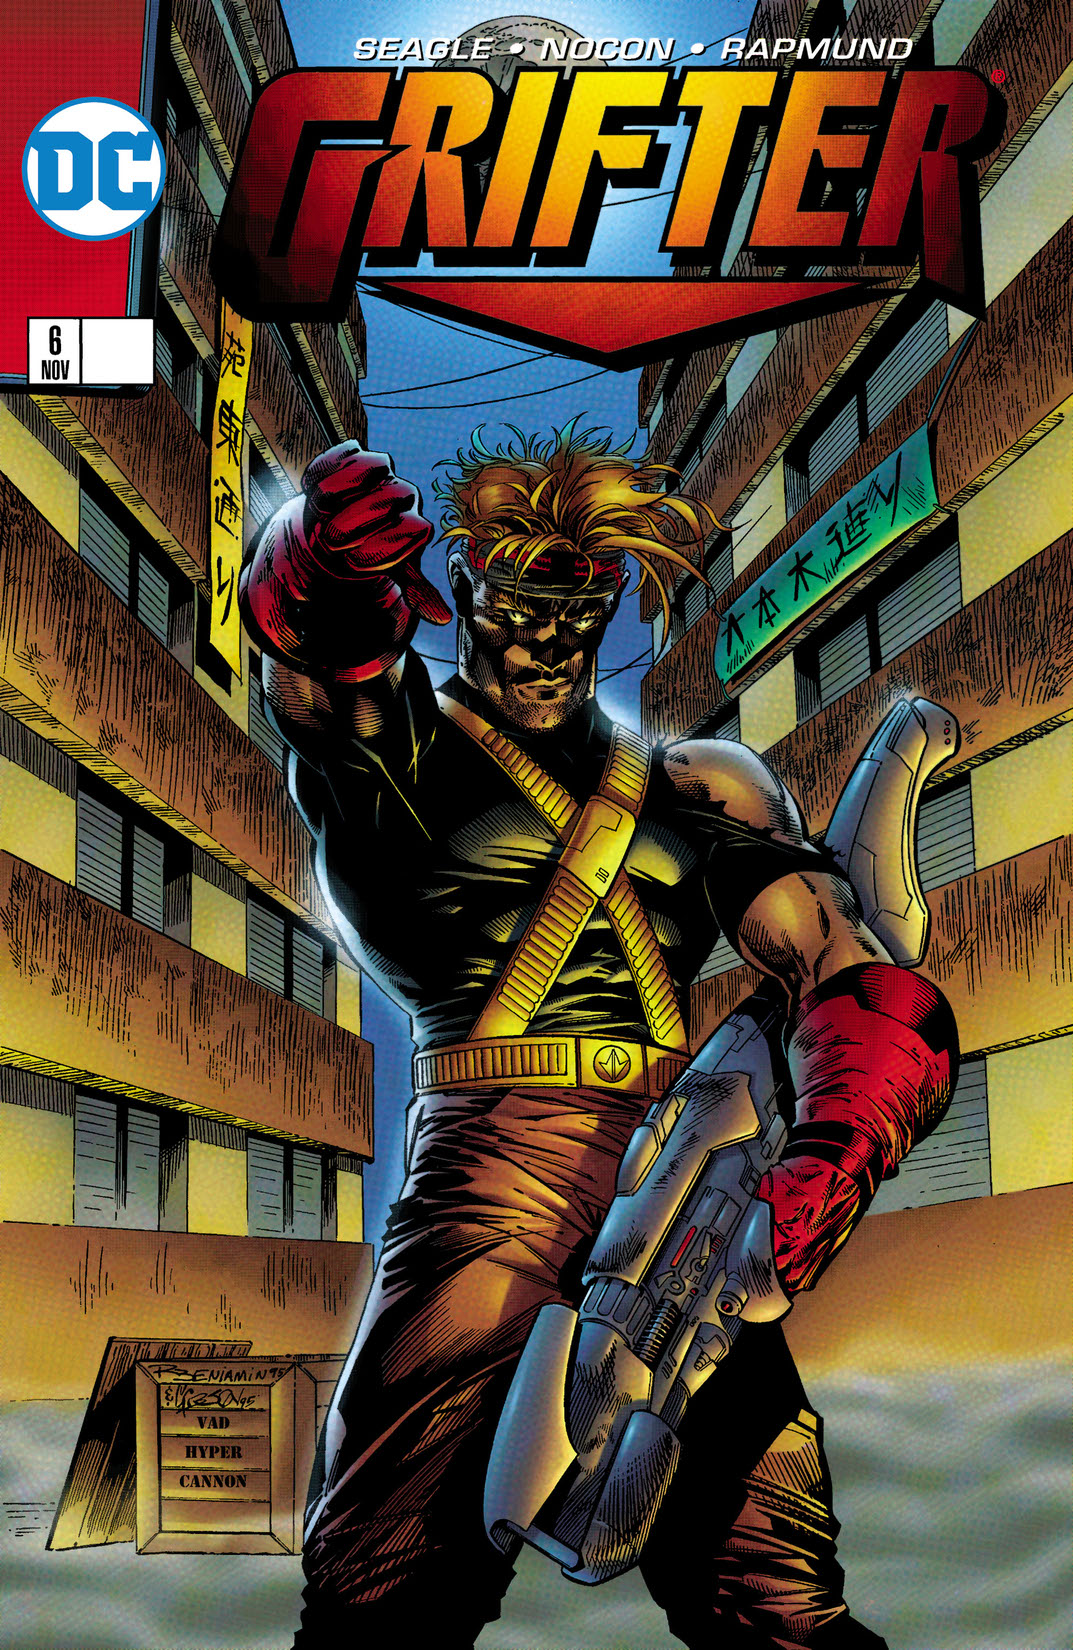 Grifter (1995-1996) #6 preview images